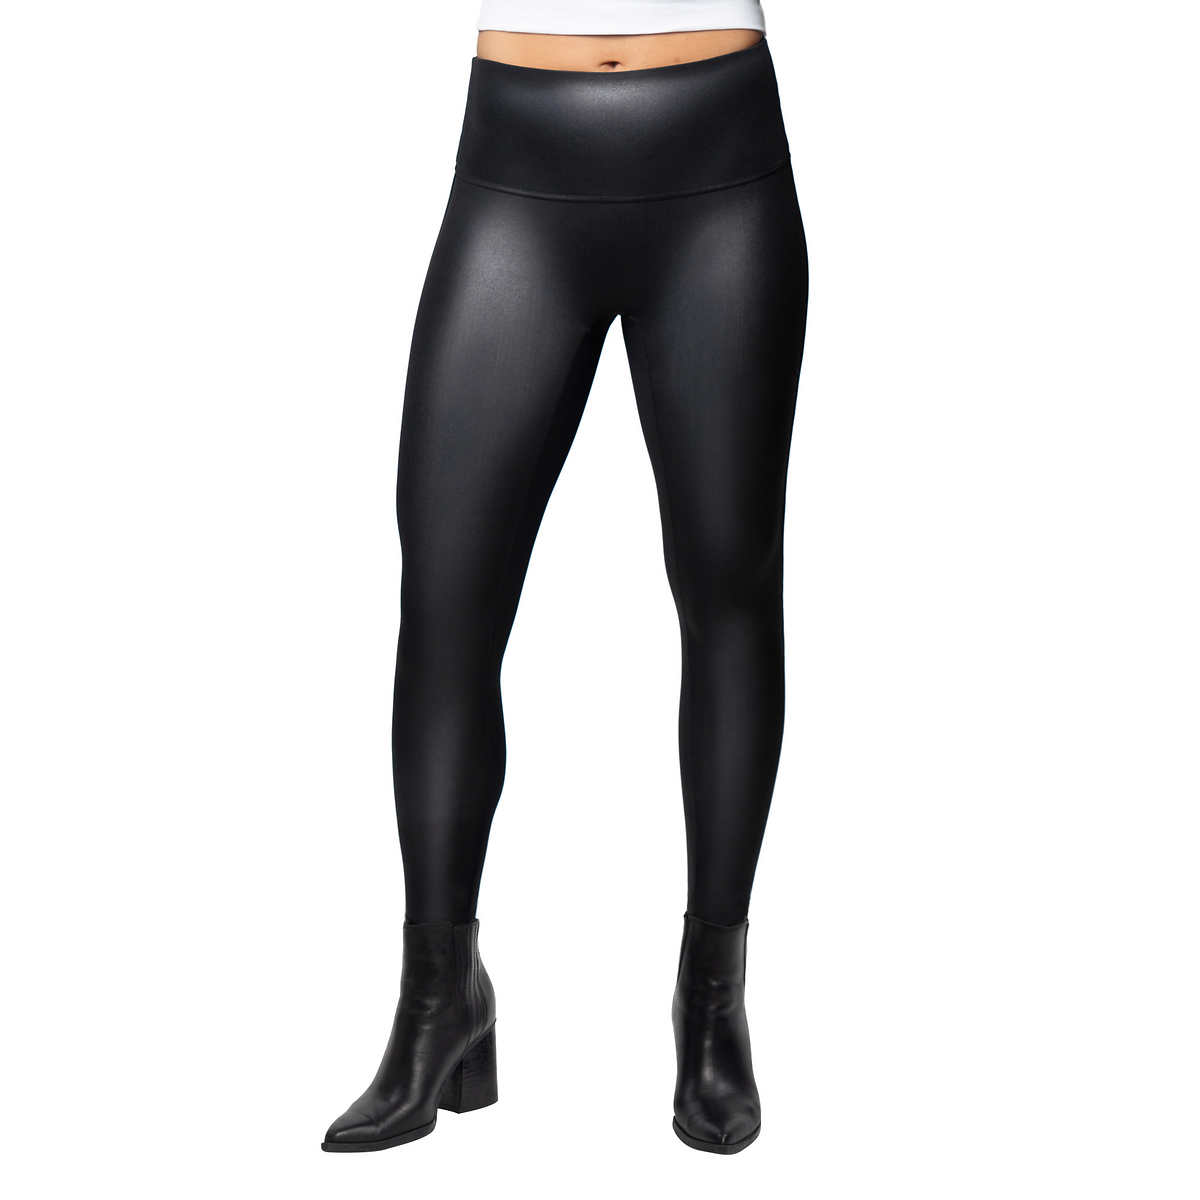 Leather leggings and you - a possibility? 